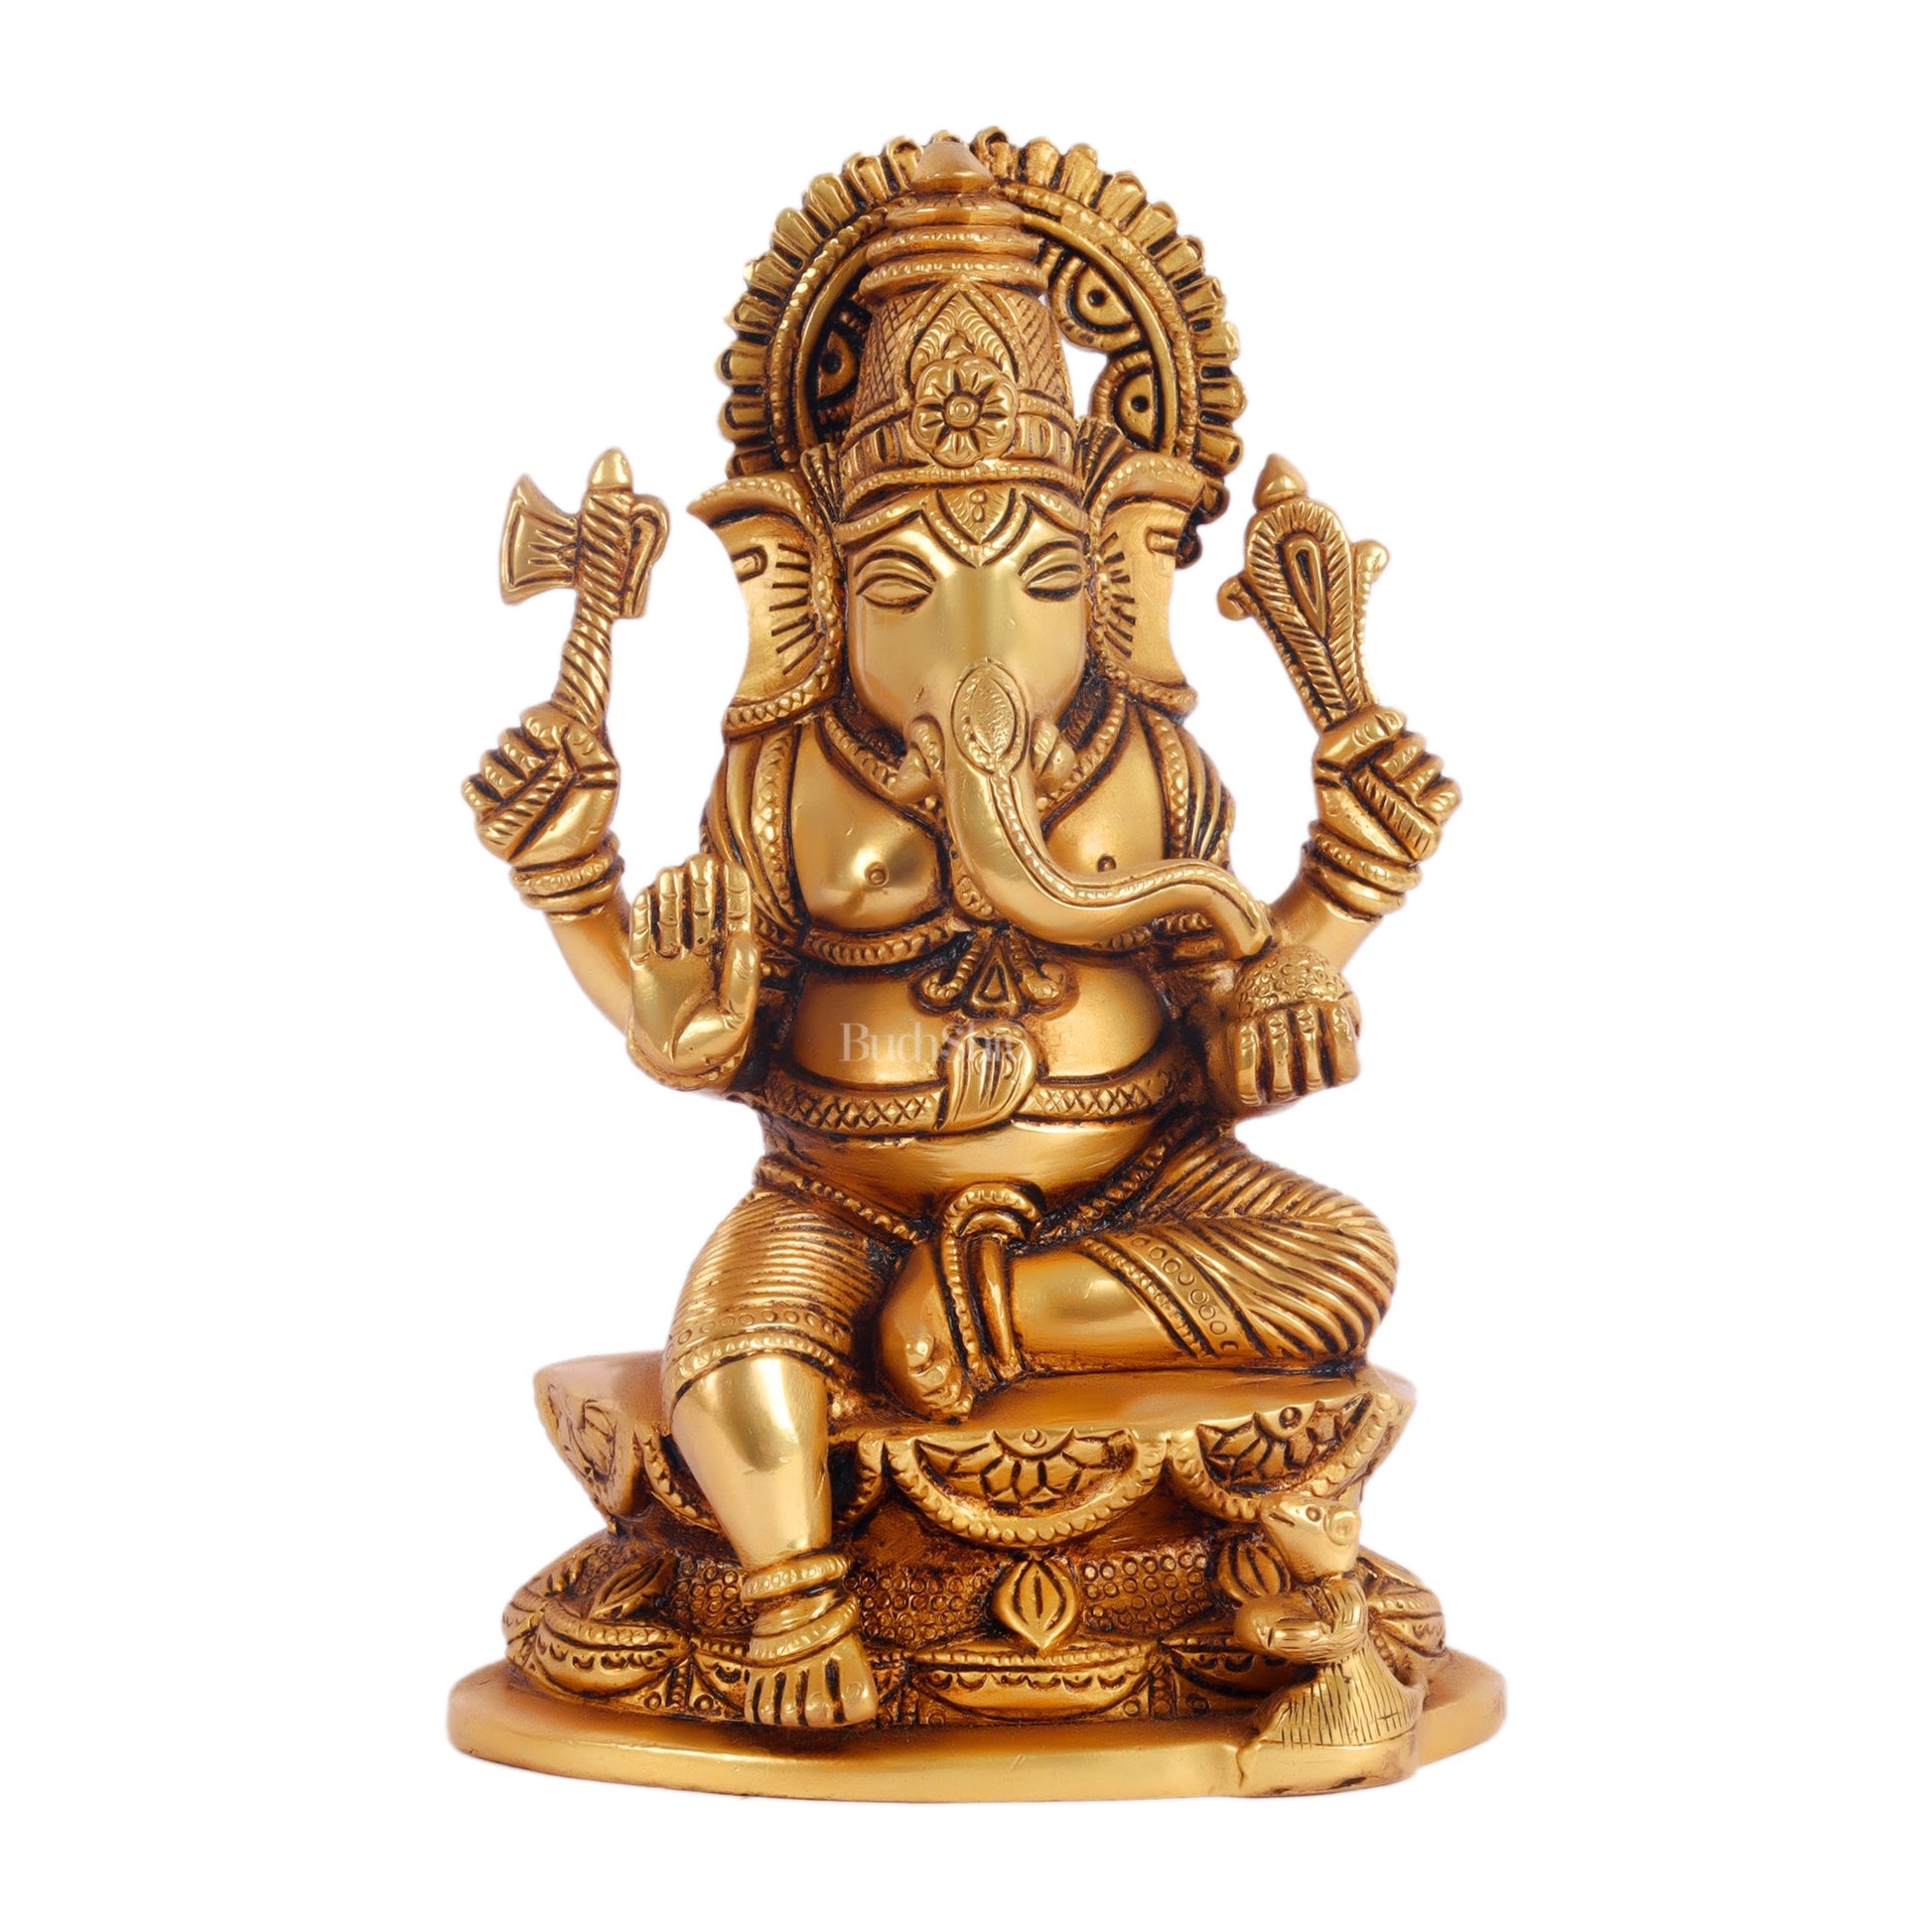 Exquisite Handcrafted Brass Ganesha Statue | Height 7 inches - Budhshiv.com